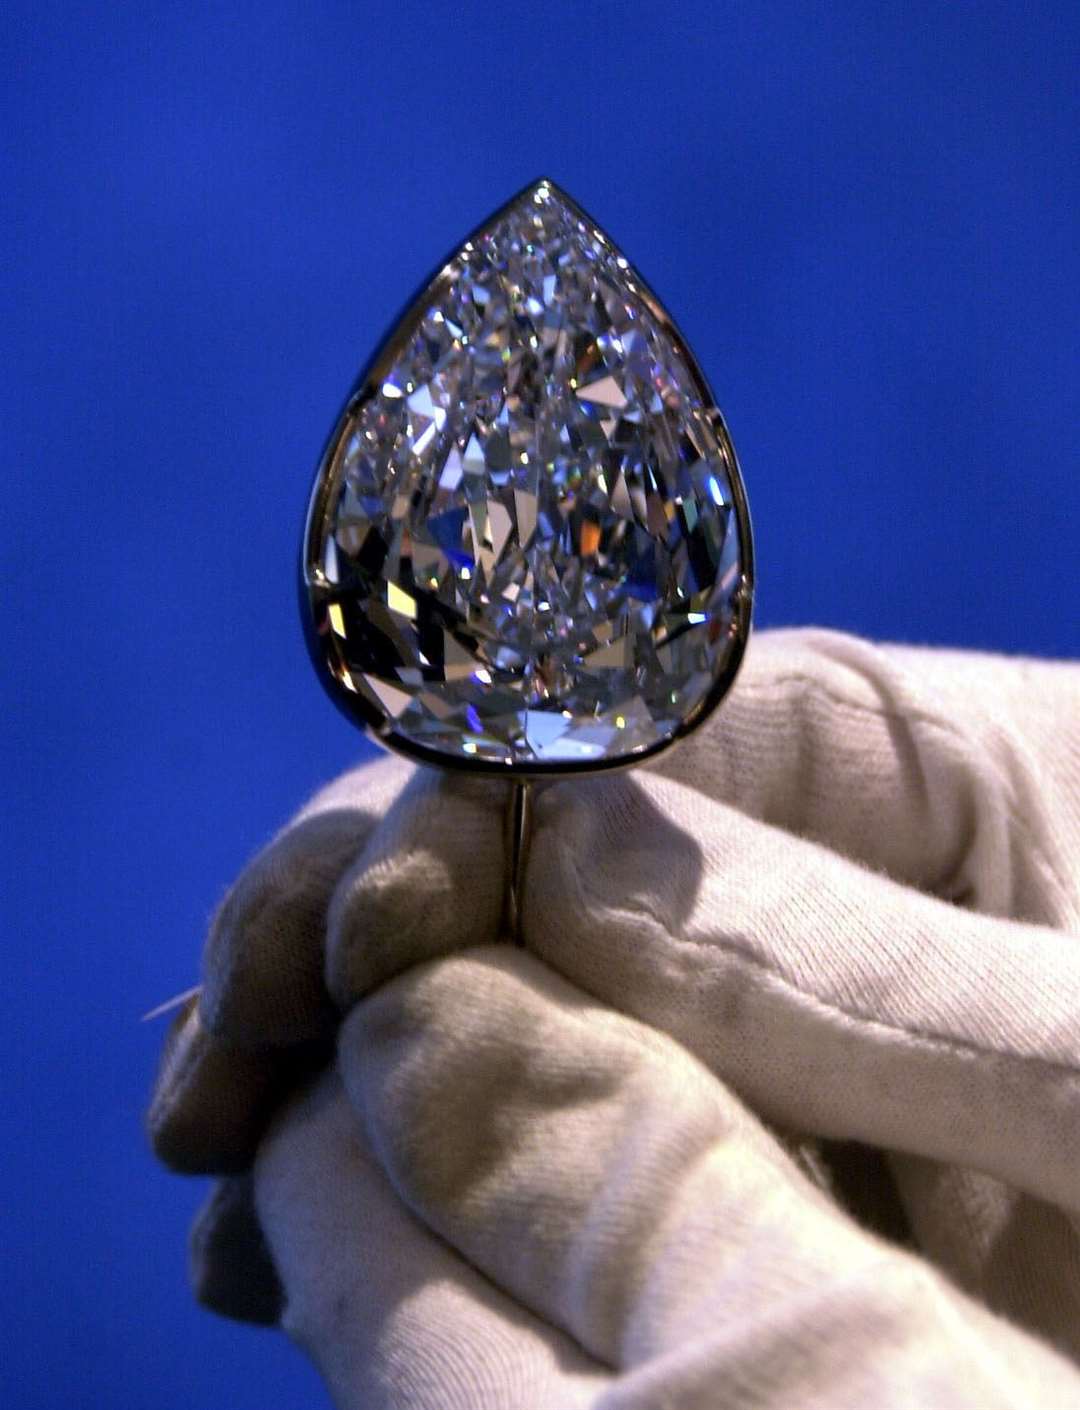 The 203-carat Millennium Star, the largest flawless pear-shaped diamond in the world. Picture: Tony Harris